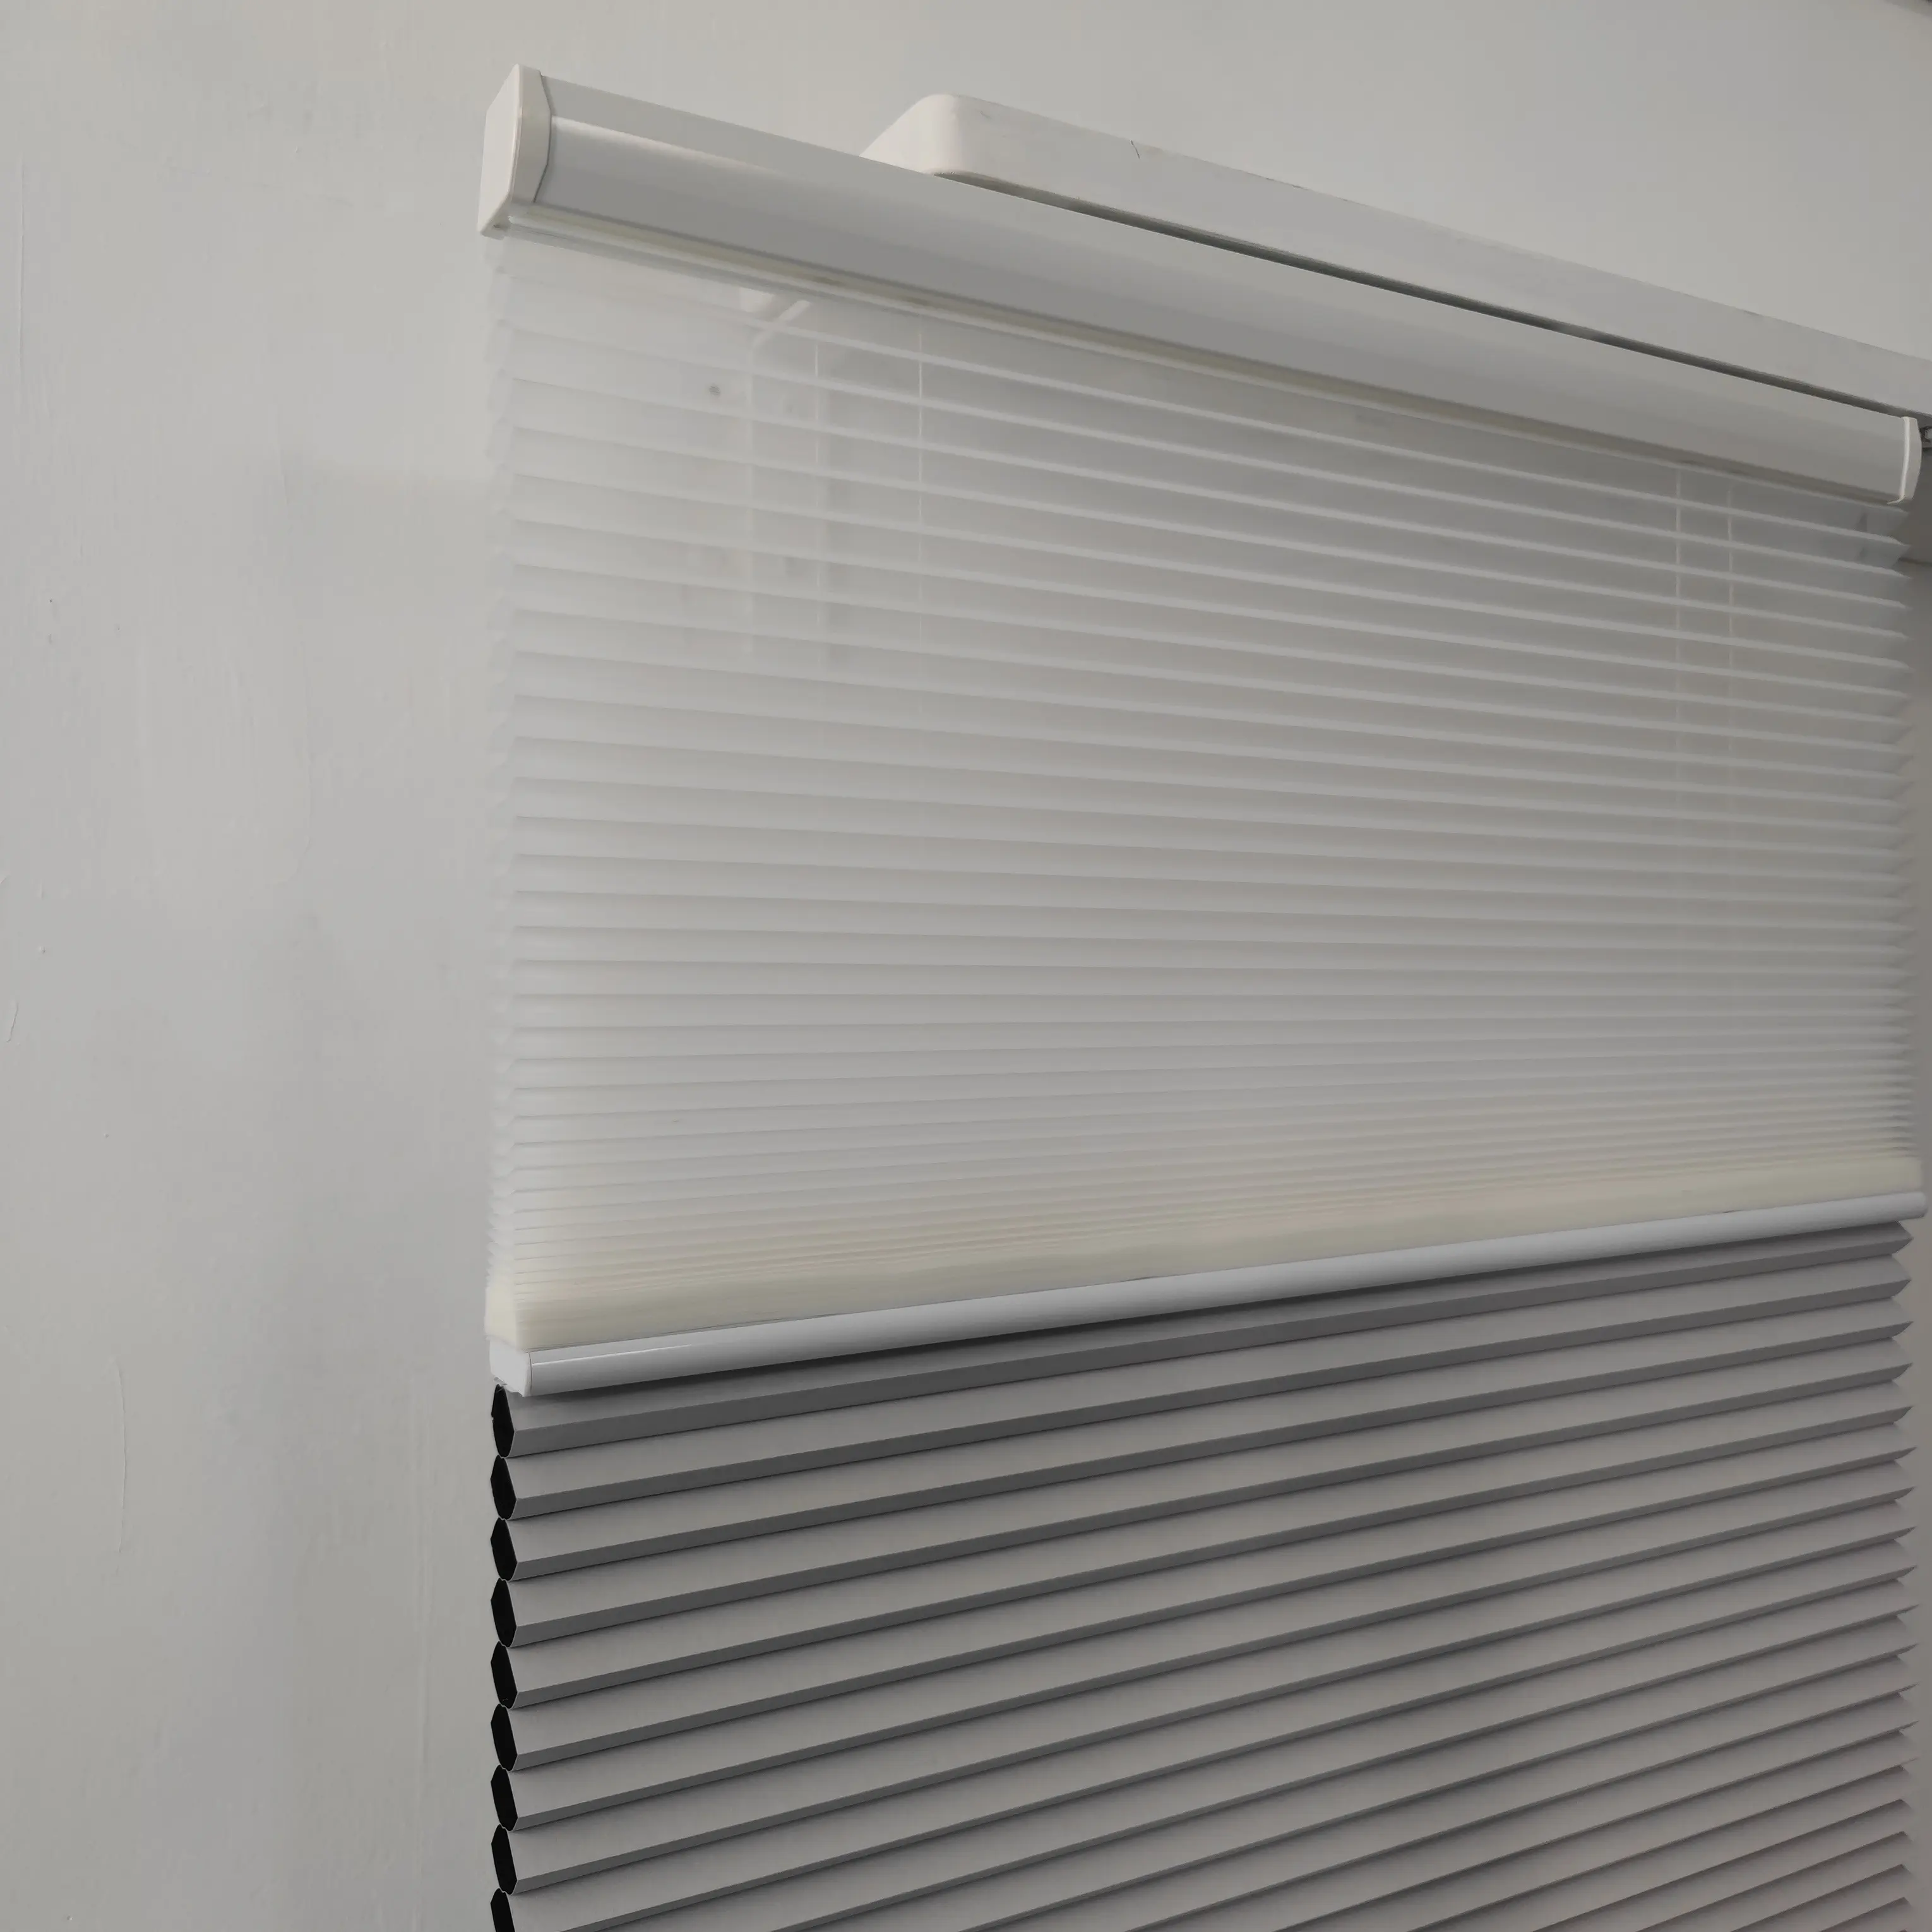 Day and Night Honeycomb Blinds Motorized, Double Cellular Sheer Semi-blackout and Full Blackout Honeycomb Window Blinds Shades